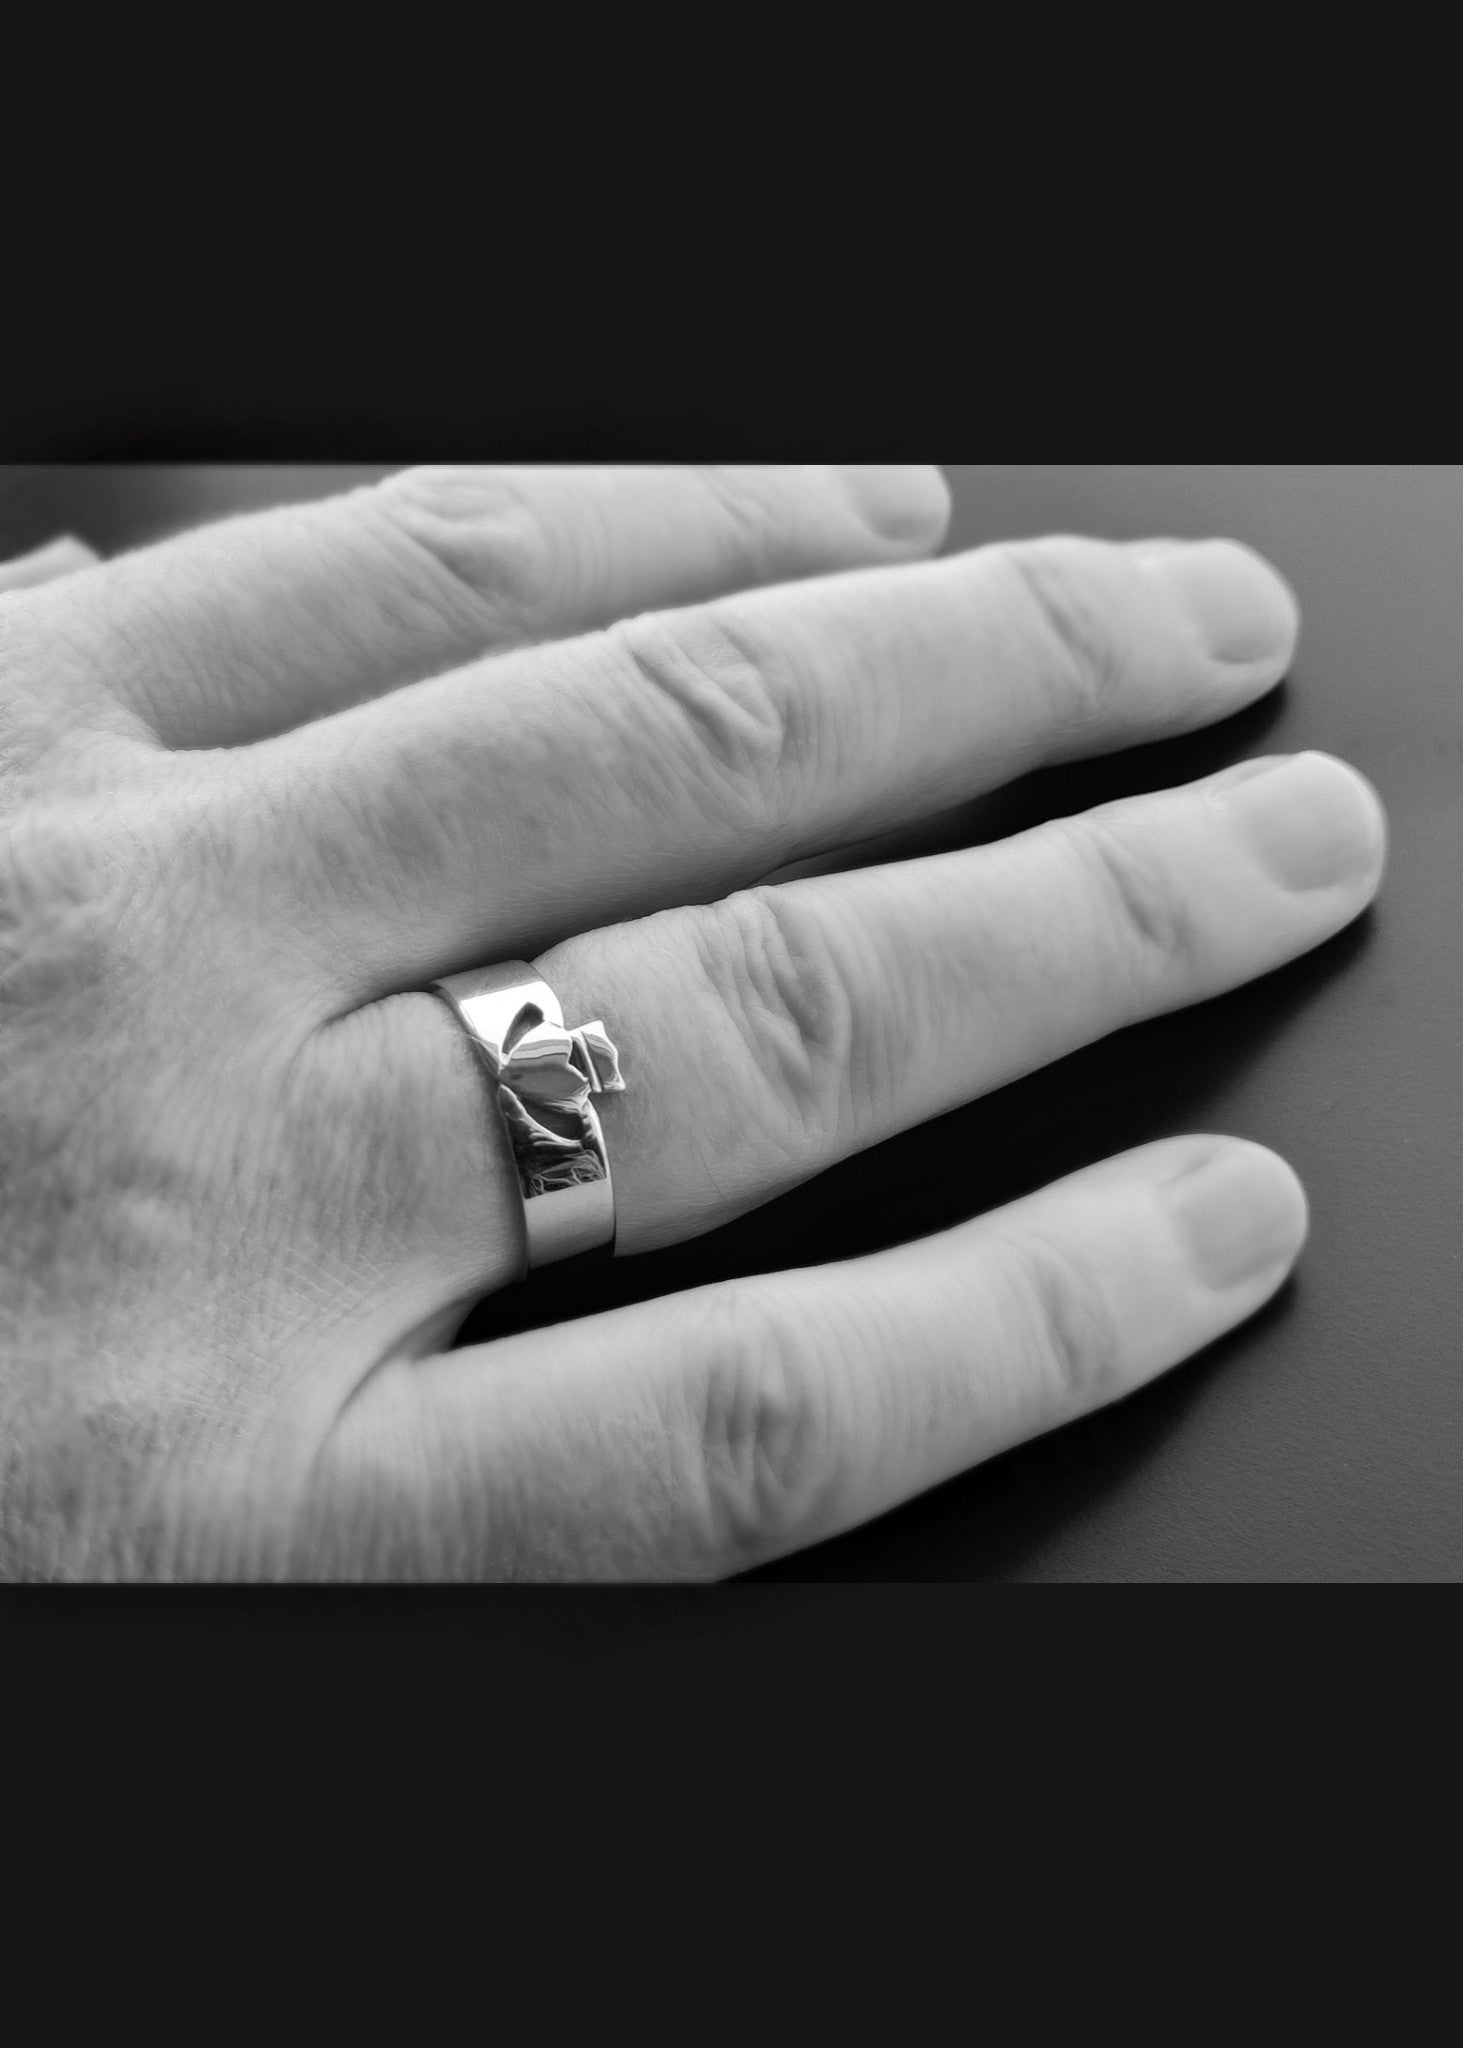 This image features a Men's gold claddagh ring in a modern style on a man's hand